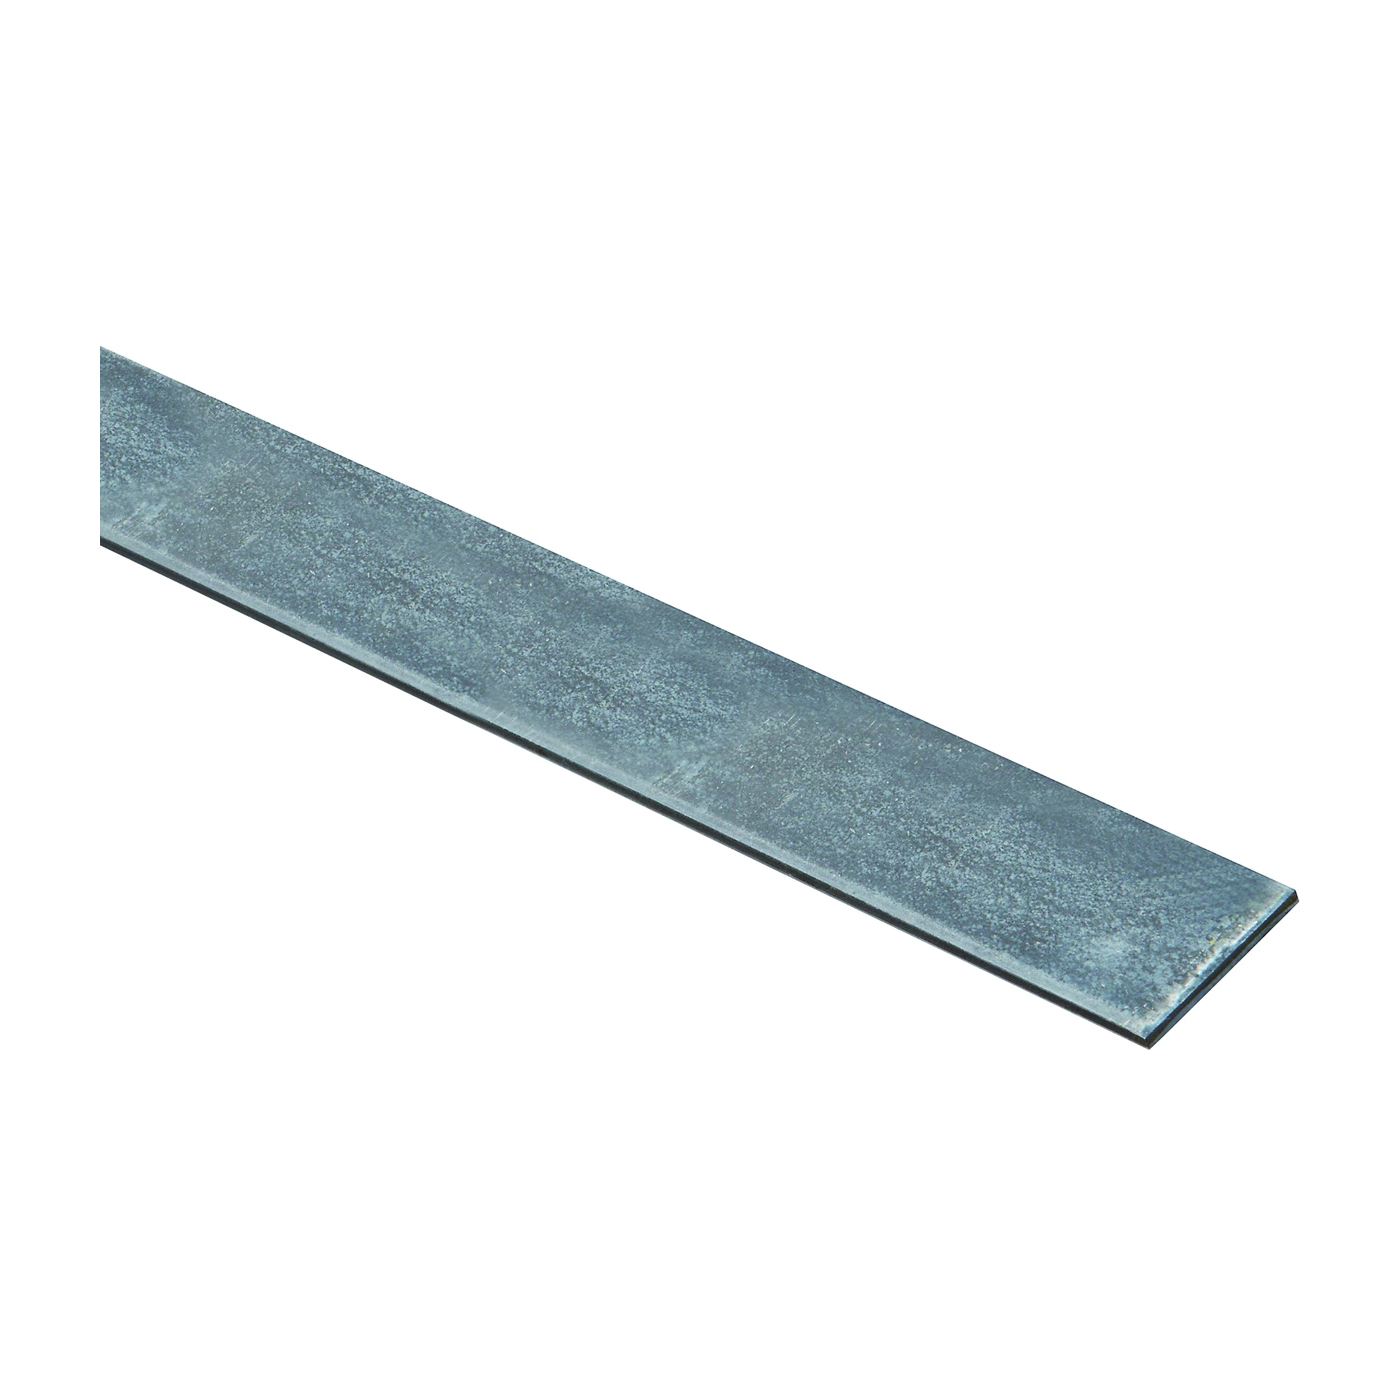 4015BC Series N180-067 Flat Stock, 1-1/4 in W, 72 in L, 0.12 in Thick, Steel, Galvanized, G40 Grade